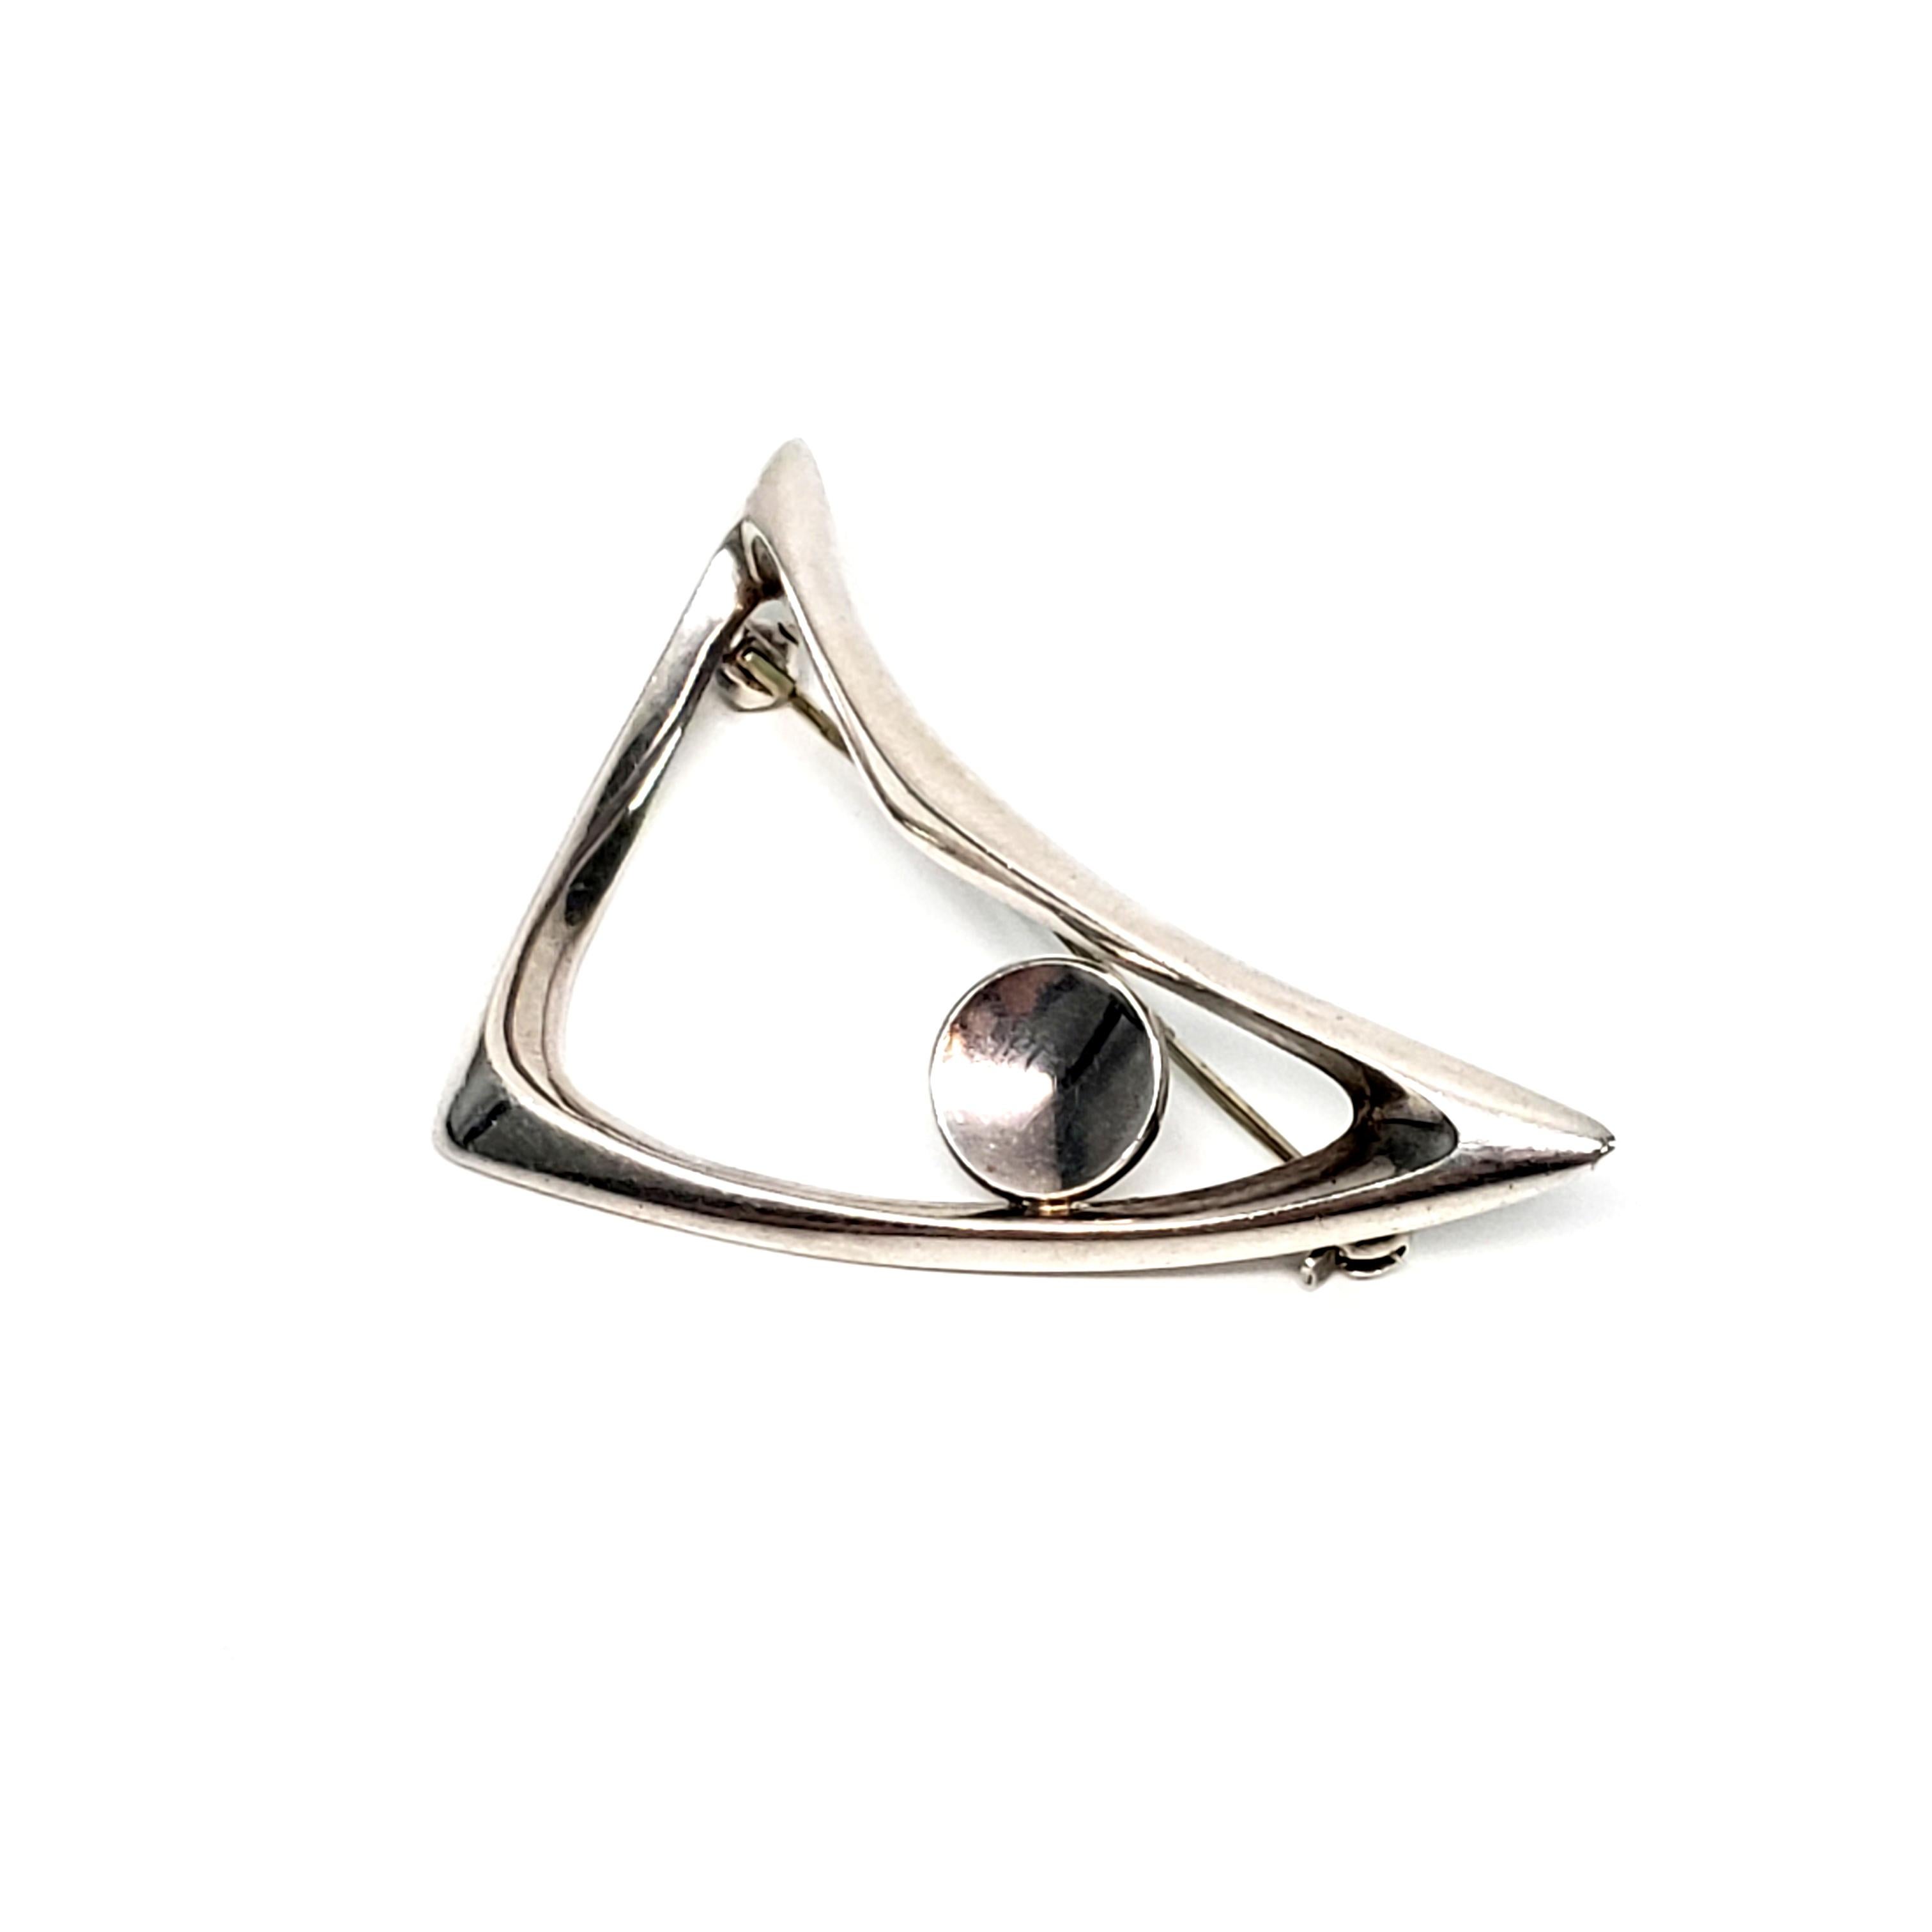 Sterling silver boomerang style pin #777 by Just Andersen of Copenhagen, Denmark.

This beautiful asymmetrical modernist piece was designed by Just Andersen, a Danish designer of the early 20th century. The exceptional craftsmanship of his classic